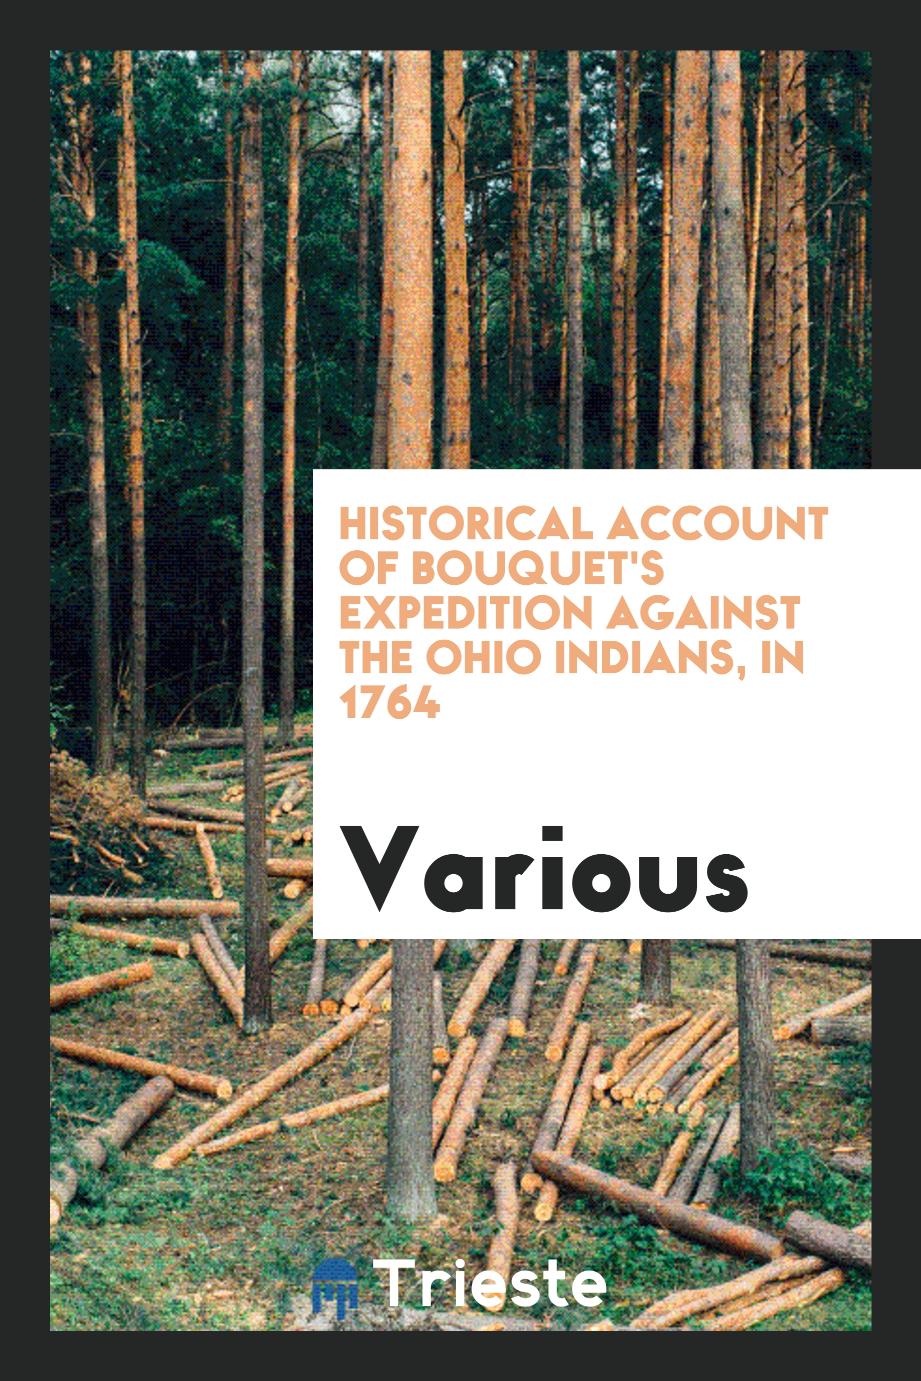 Historical account of Bouquet's expedition against the Ohio Indians, in 1764